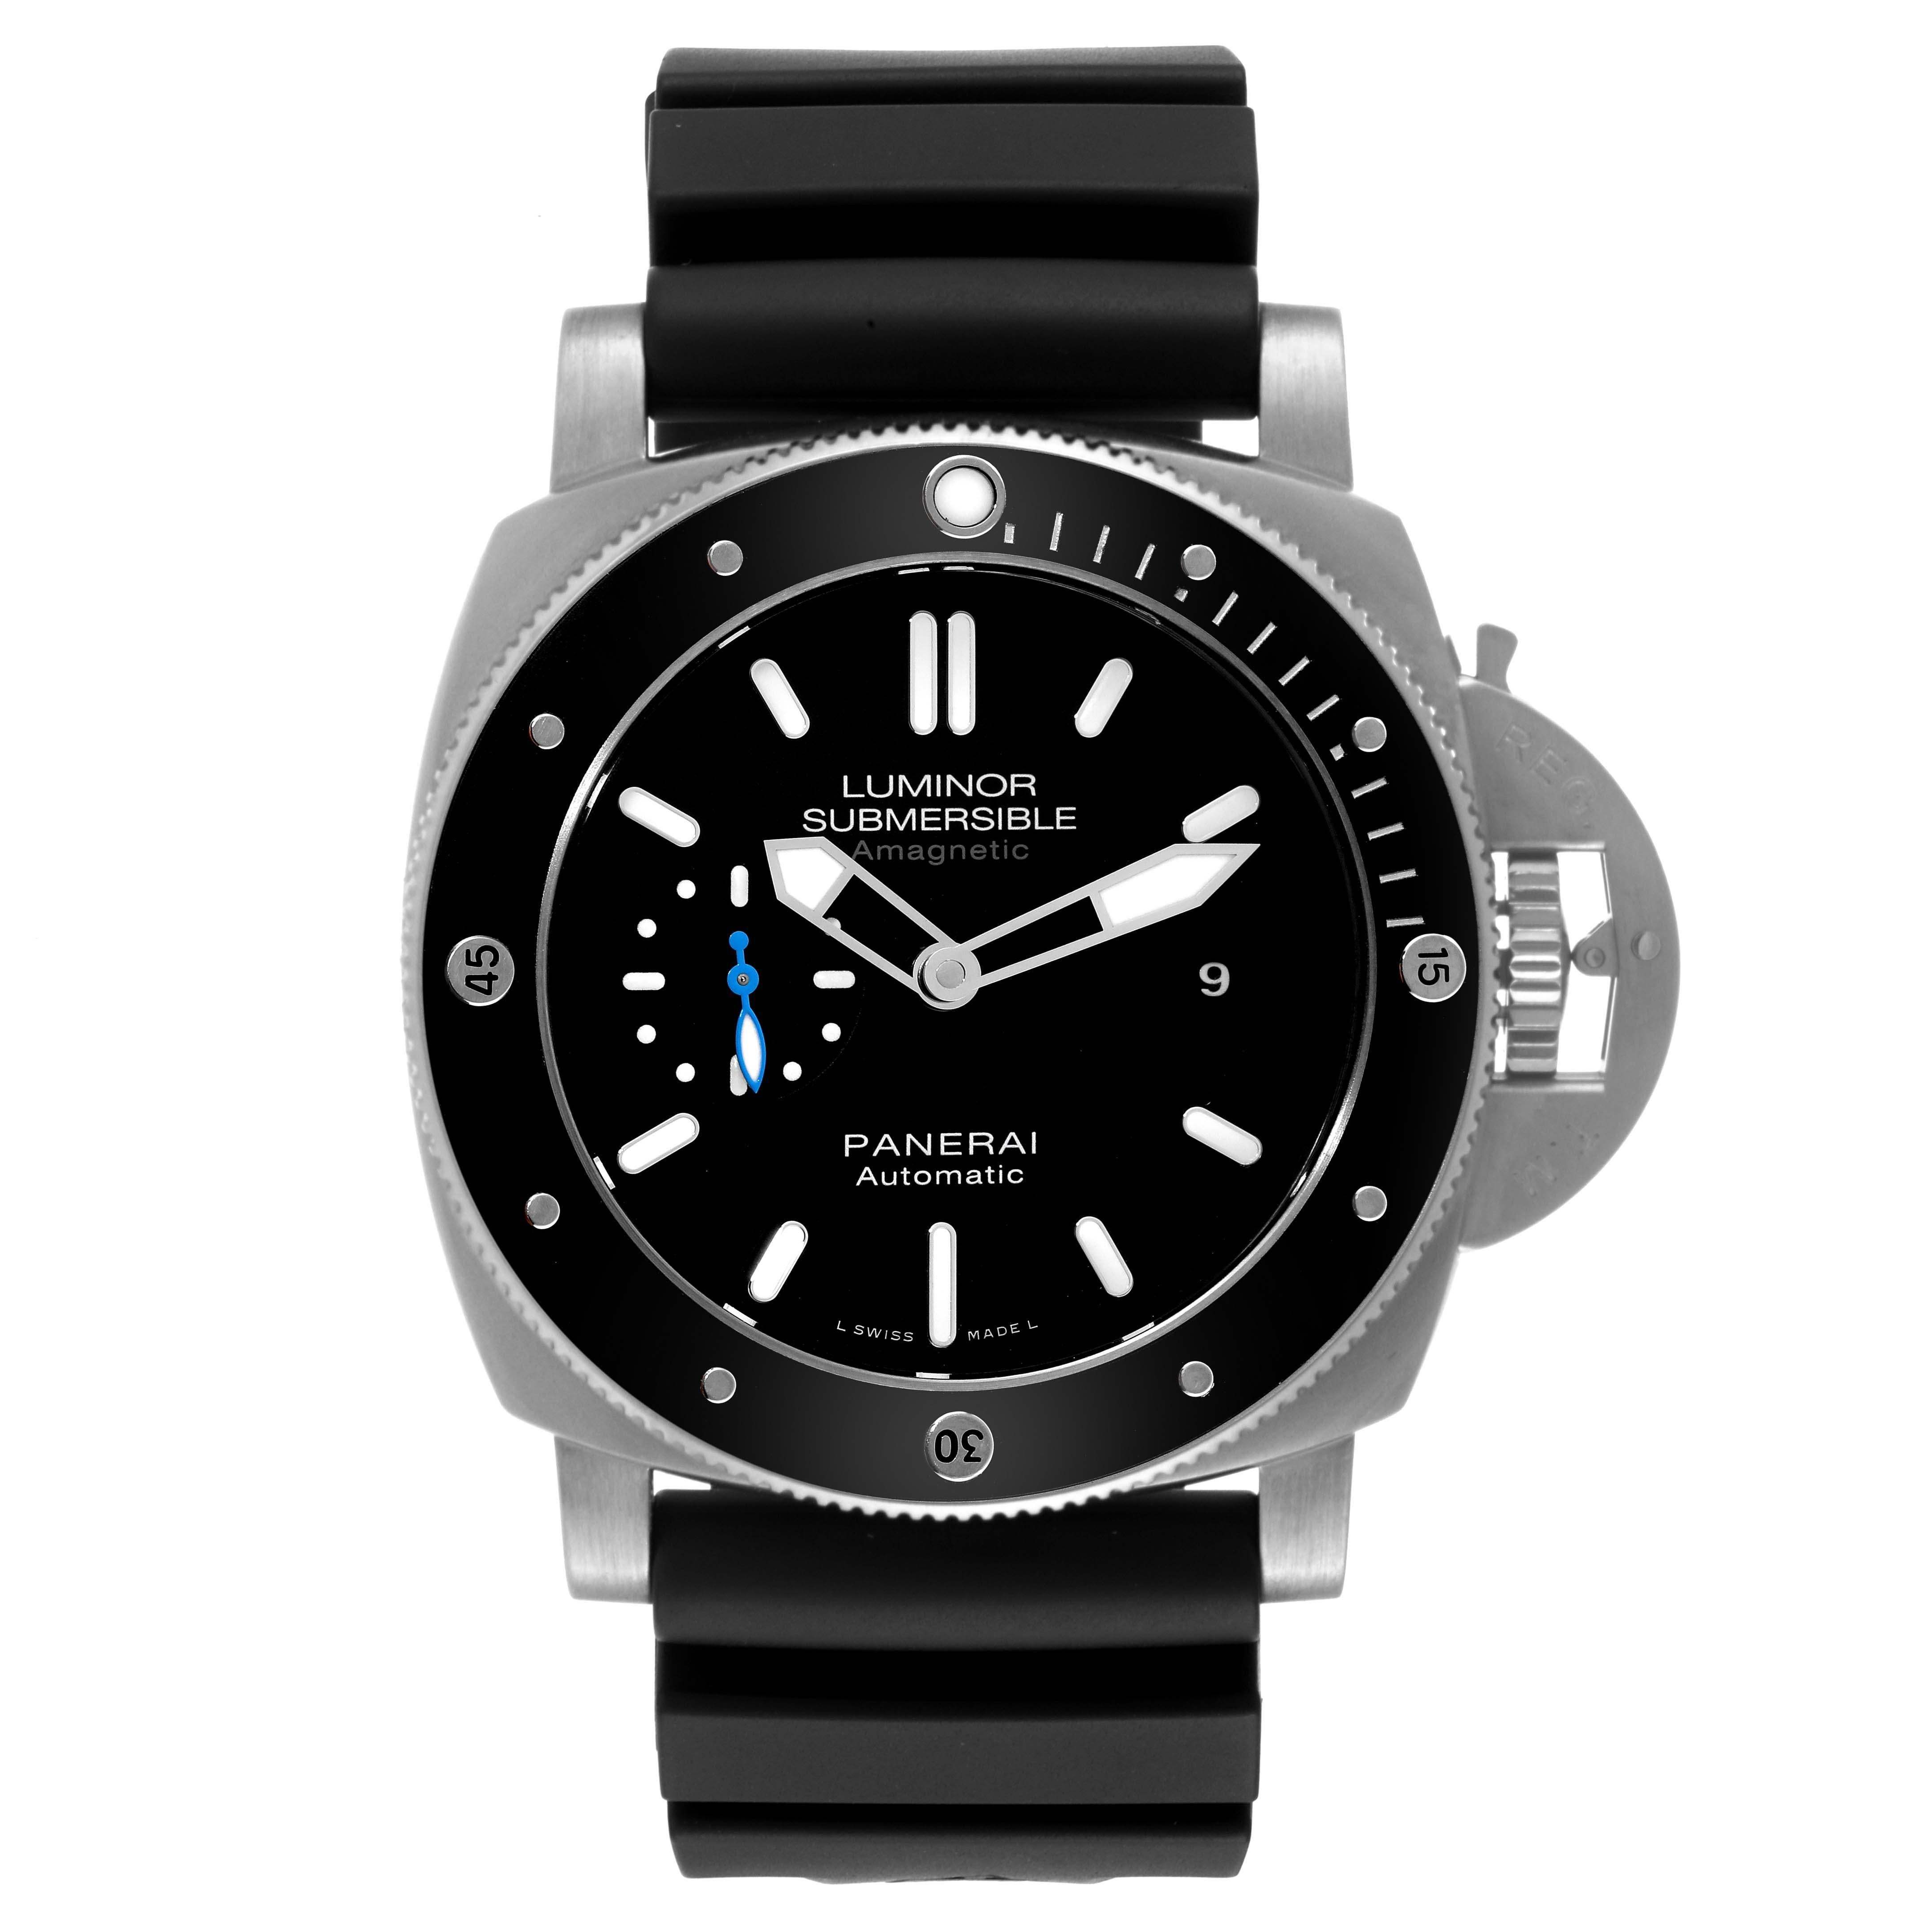 Panerai Luminor Submersible 1950 Amagnetic Mens Watch PAM01389 Box Papers. Automatic self-winding movement. Two part cushion shaped titanium case 47.0 mm in diameter. Panerai patented crown protector. Unidirectional rotating titanium bezel with a